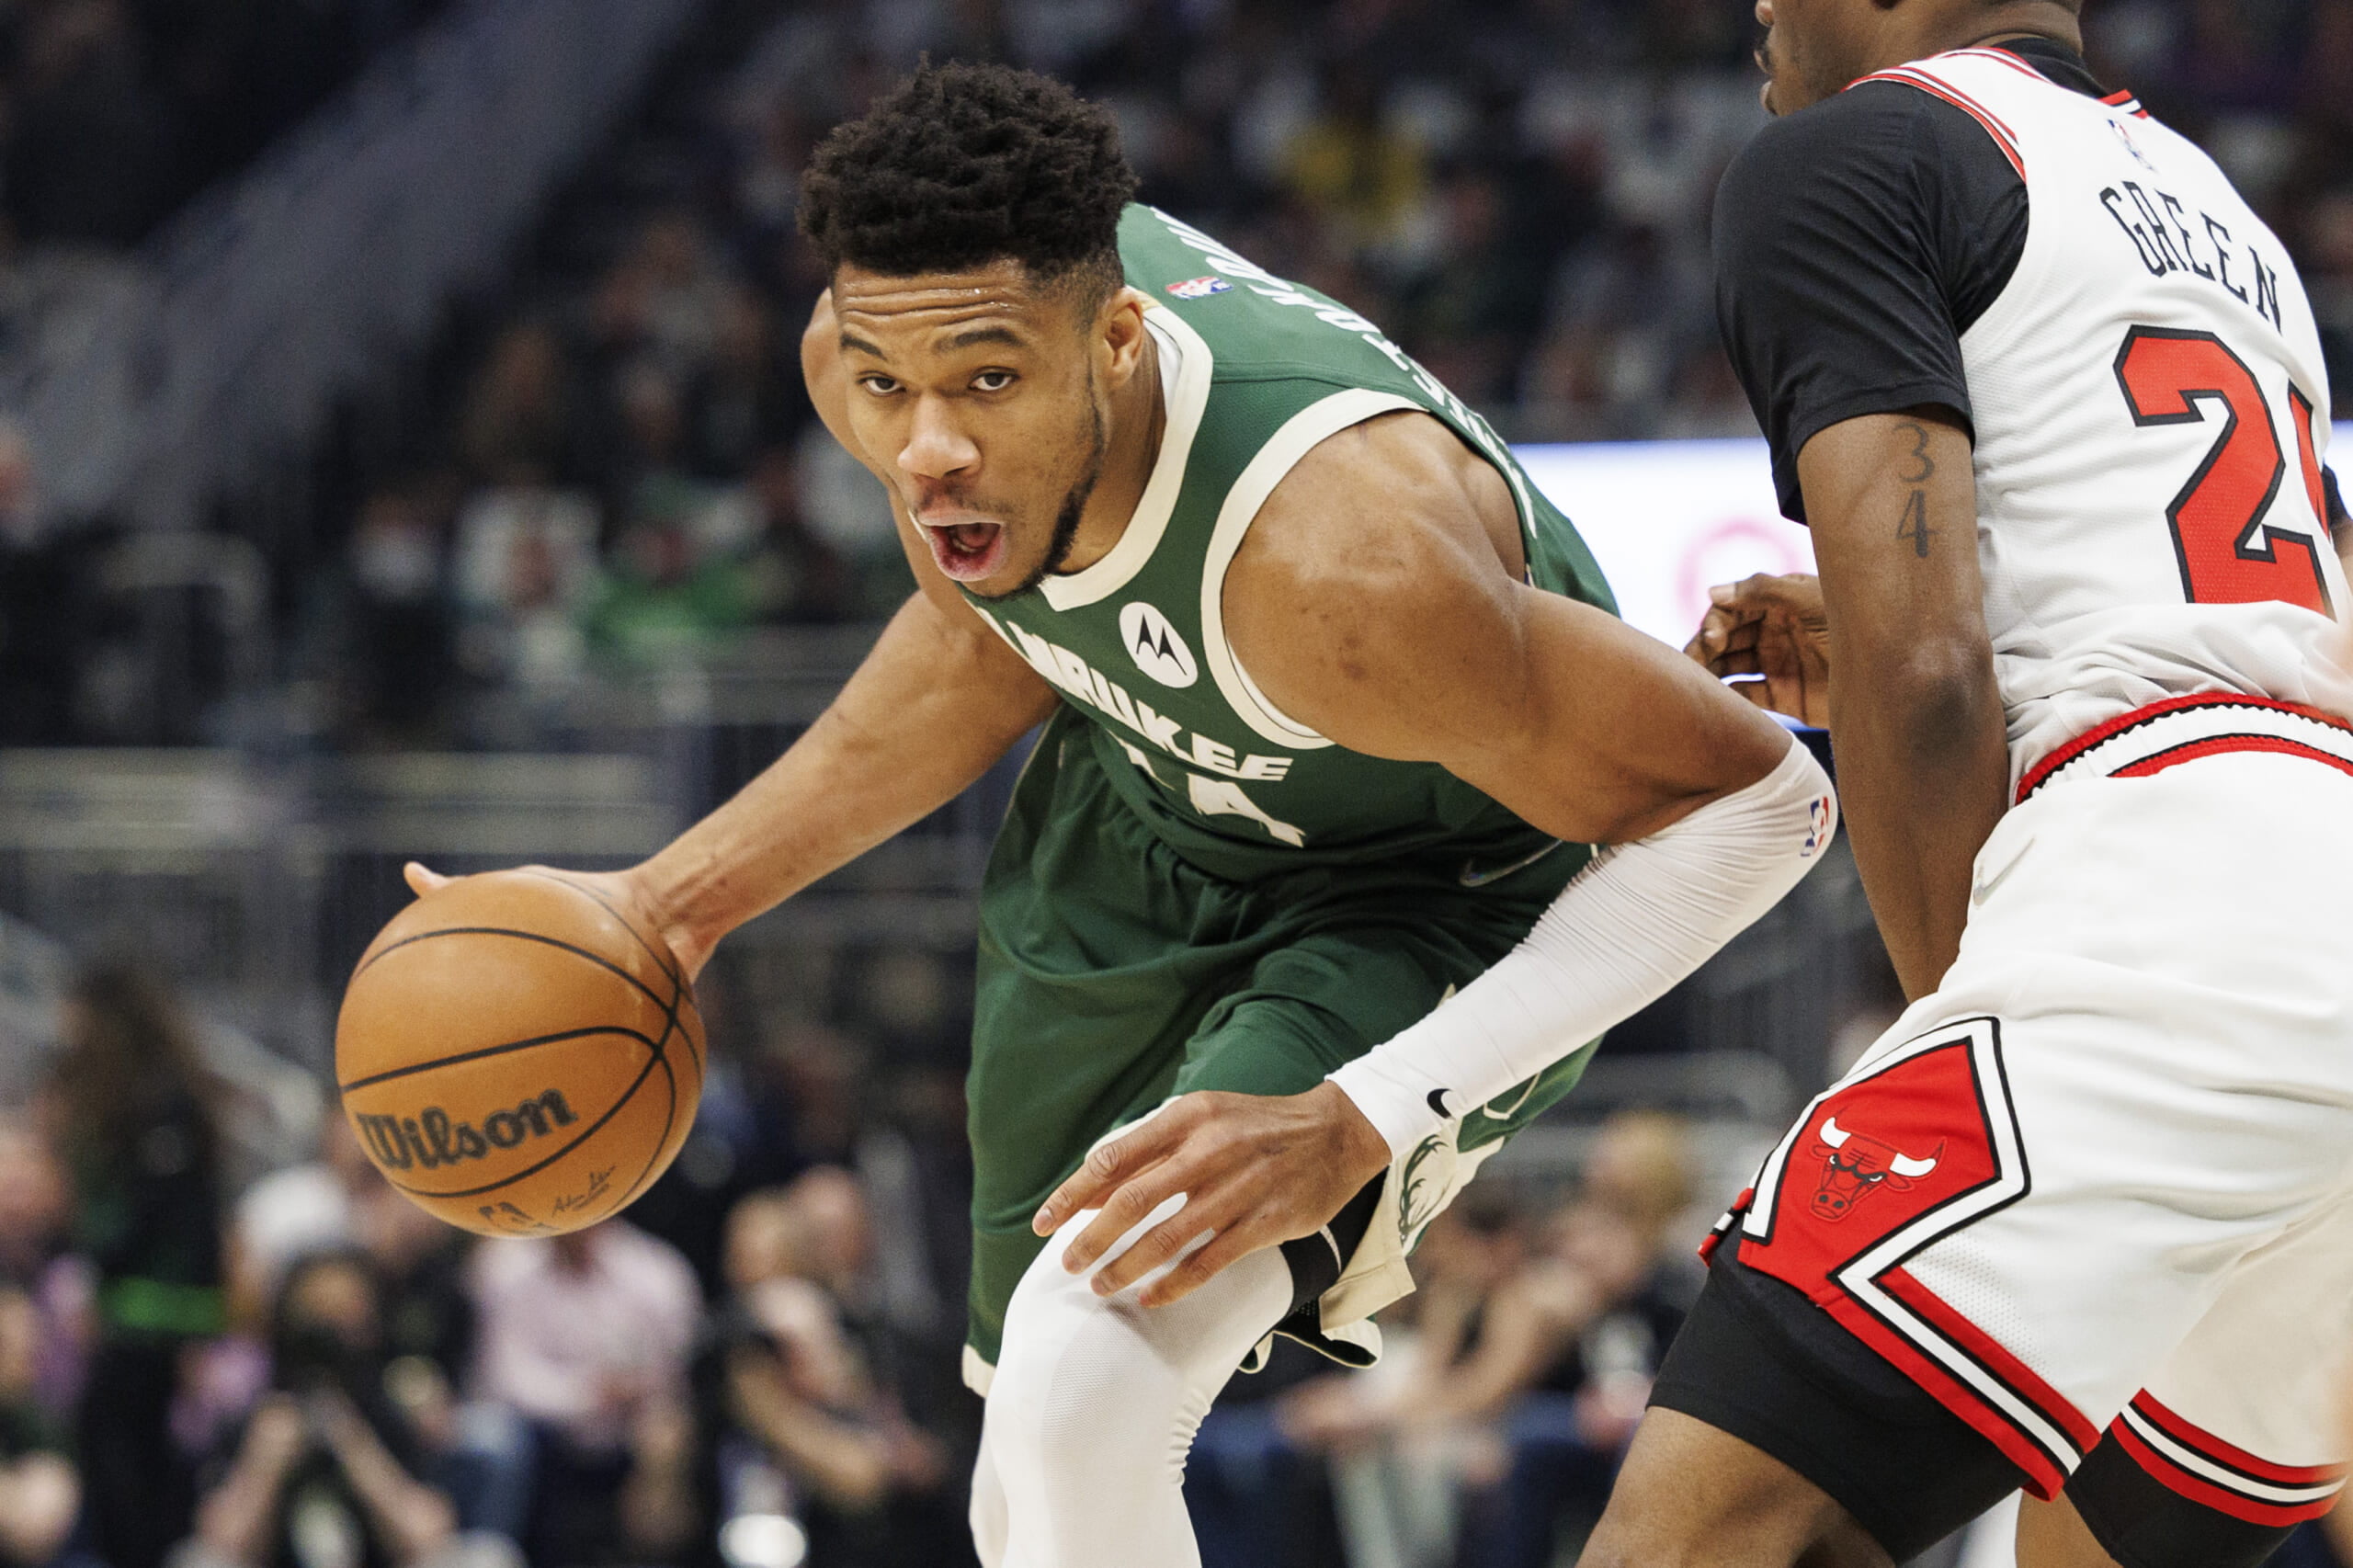 Antetokounmpo wants to see how committed Bucks are to winning a